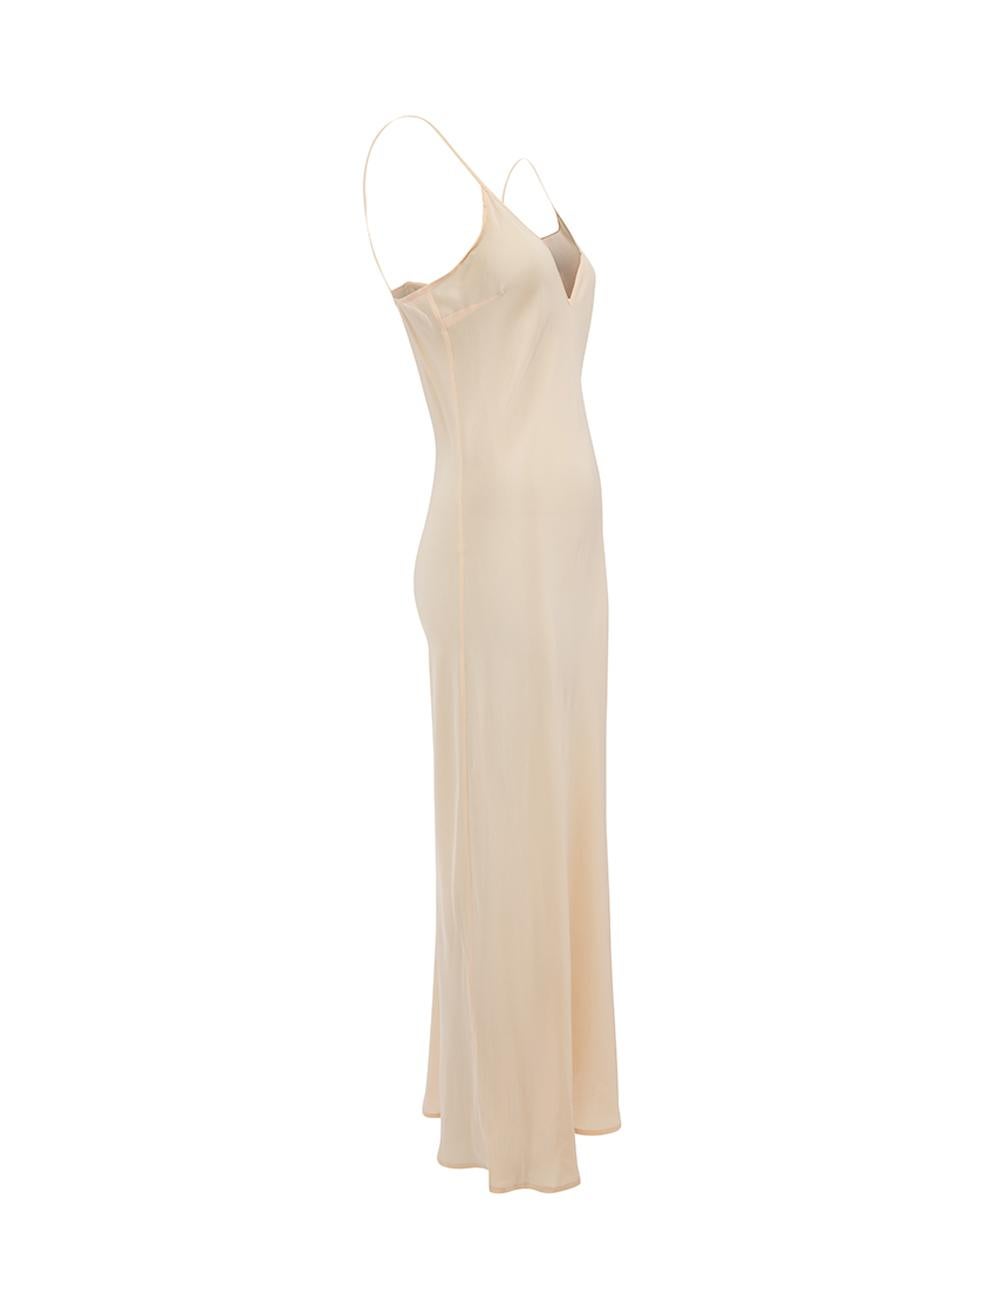 CONDITION is Very good. Hardly any visible wear to dress is evident on this used Christian Dior designer resale item. Details Blush pink Silk Slip dress Maxi length V neckline Sleeveless Made in Italy Composition NO COMPOSITION LABEL BUT FEELS LIKE